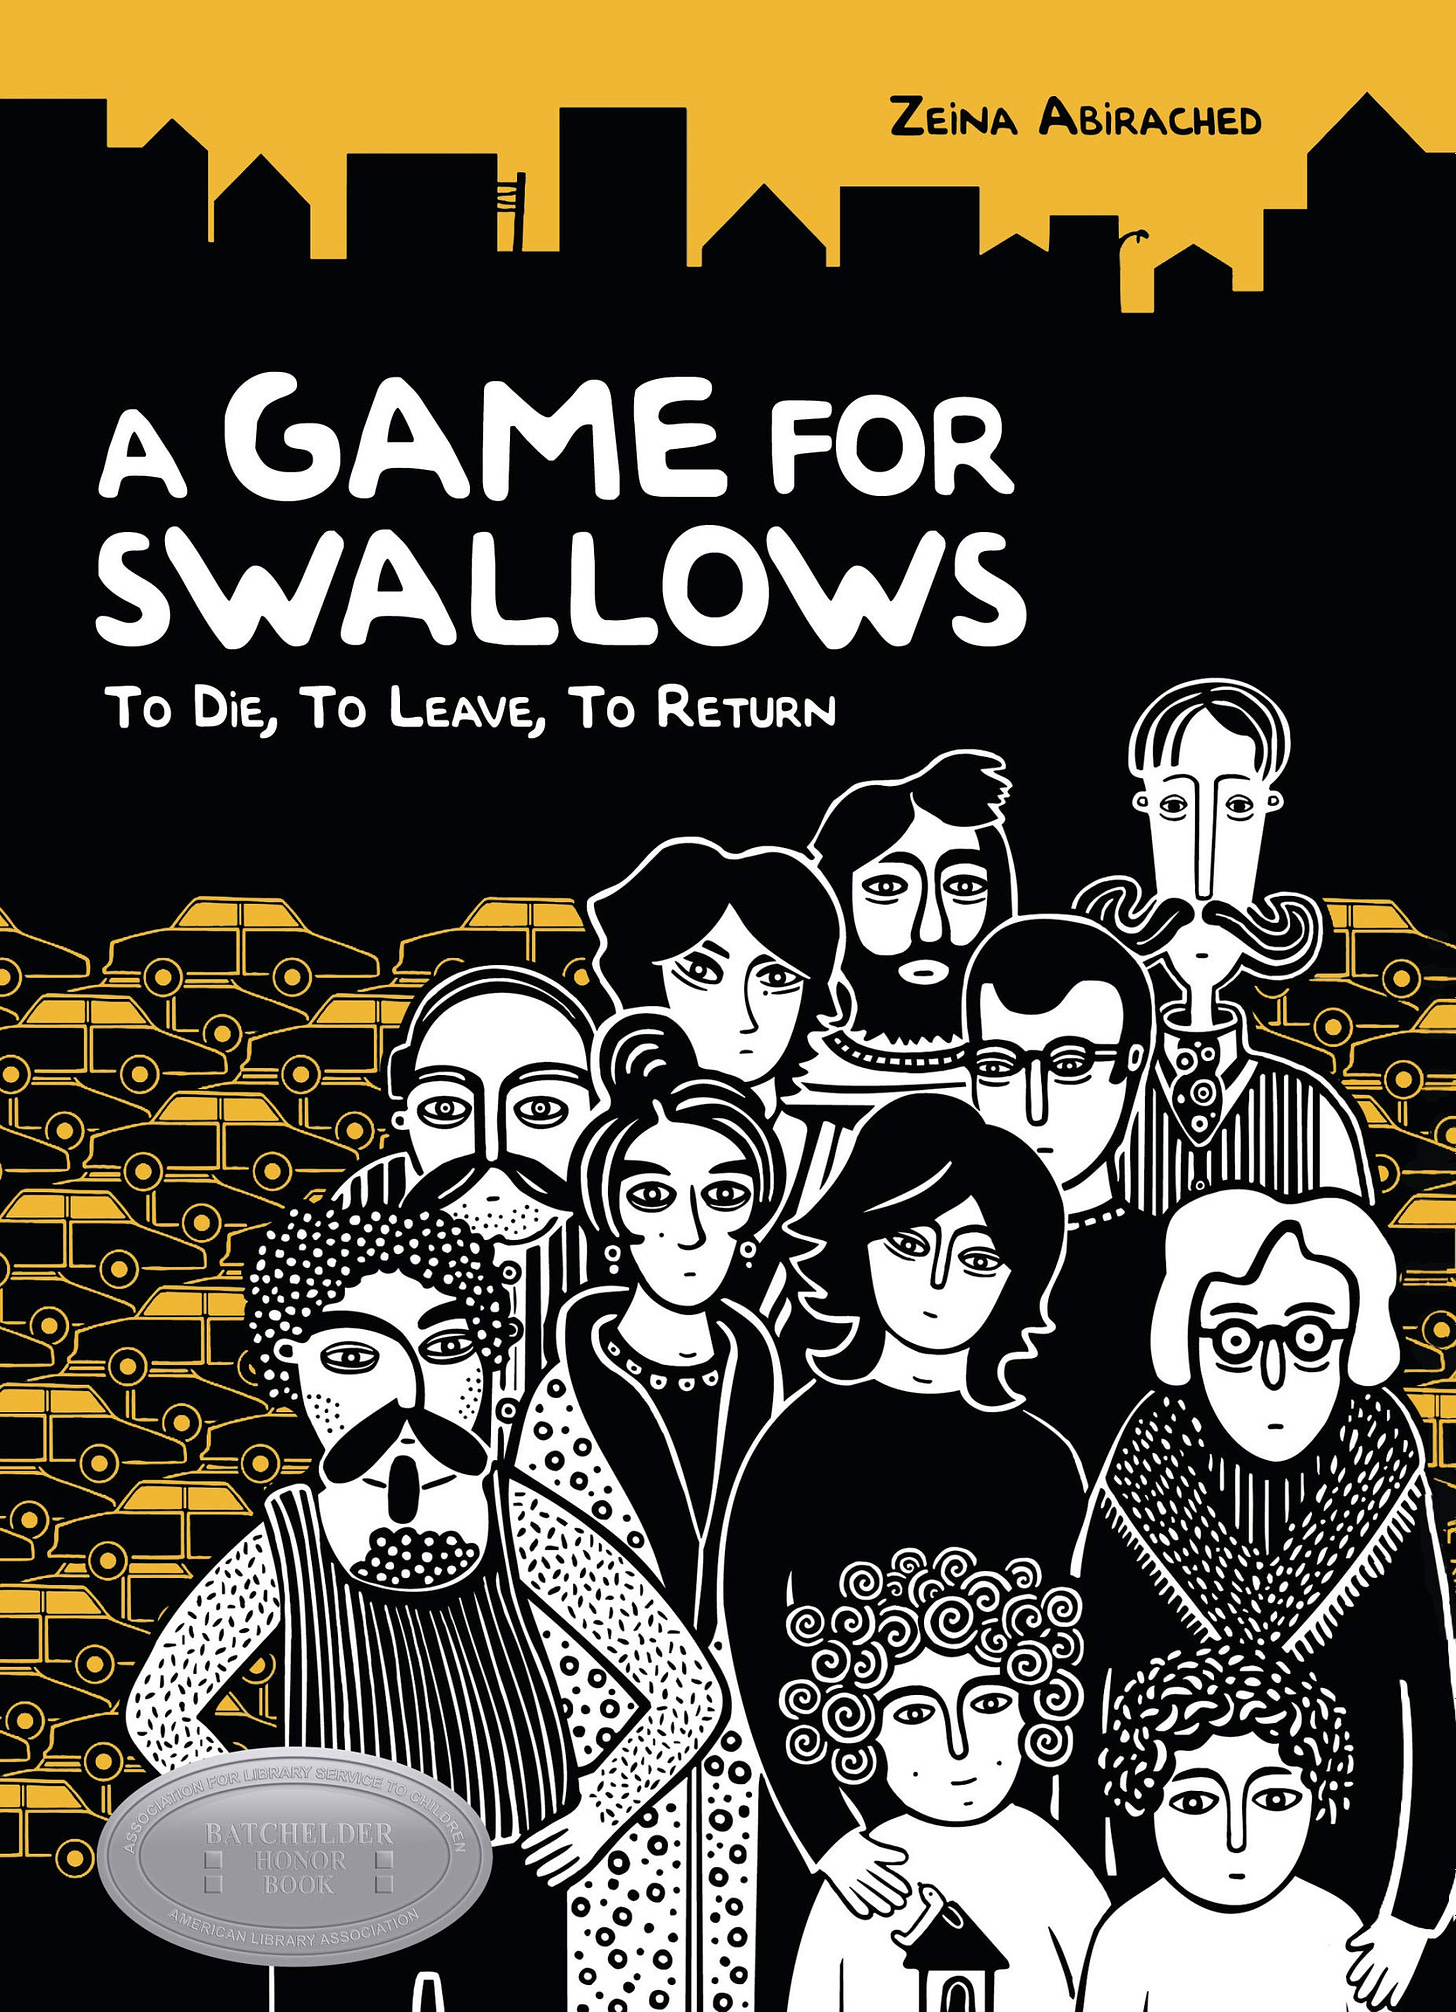 Amazon.com: A Game for Swallows: To Die, To Leave, To Return (Single  Titles) (9781575059419): Abirached, Zeina, Abirached, Zeina: Books